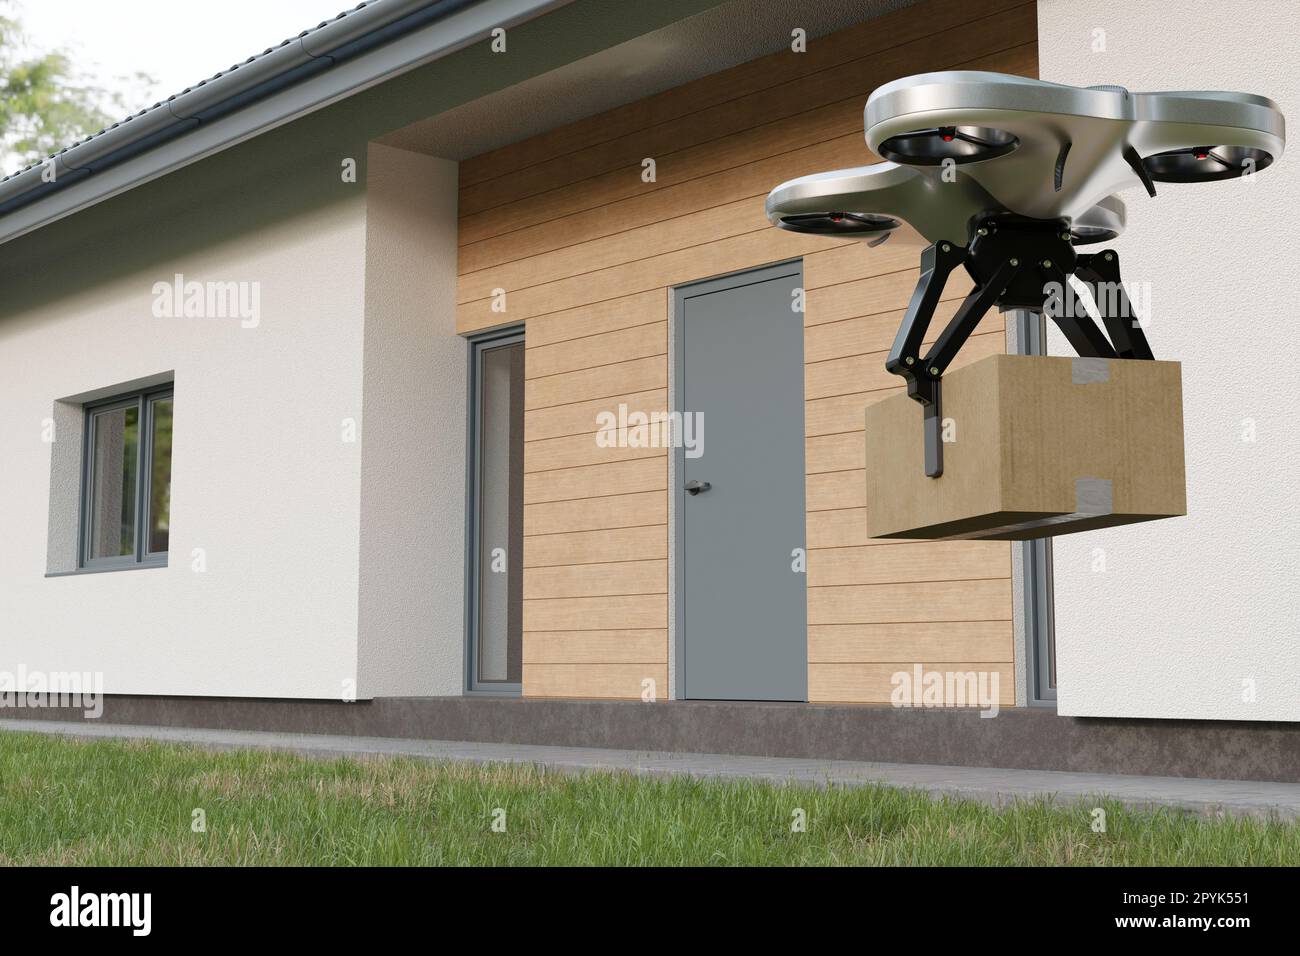 Drone delivery of food and goods to house, quadcopter flies with box, fast and Effective delivery, future technology. Stock Photo